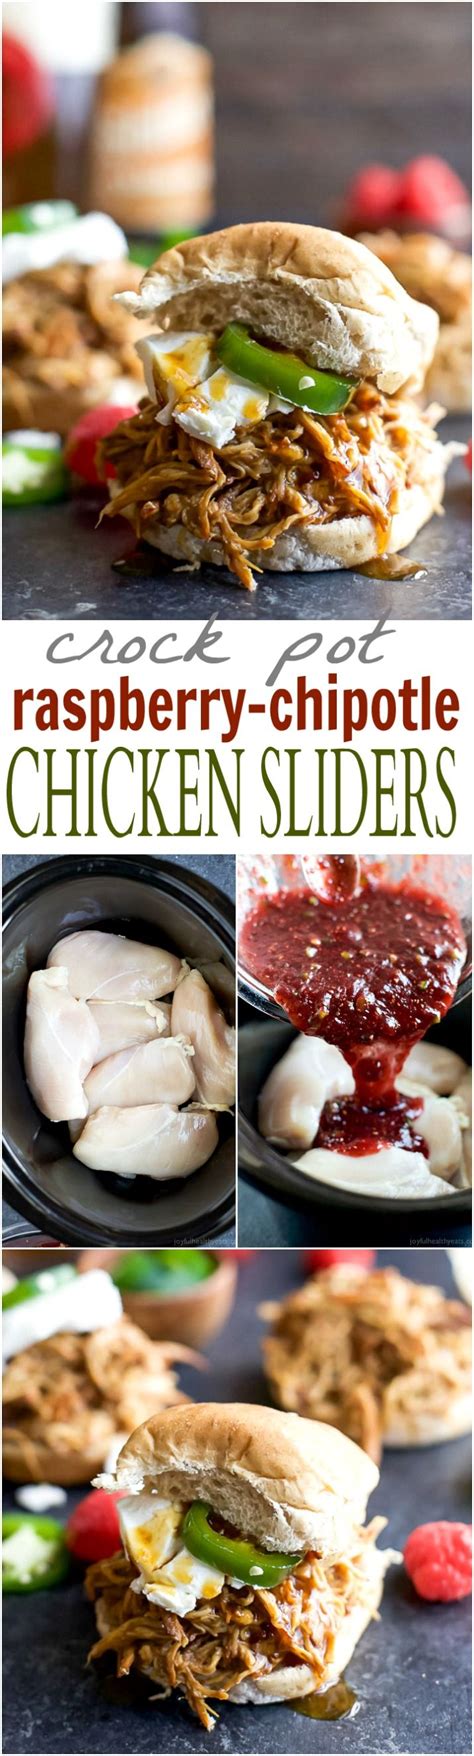 crock pot raspberry chipotle chicken sliders are an easy meal for your